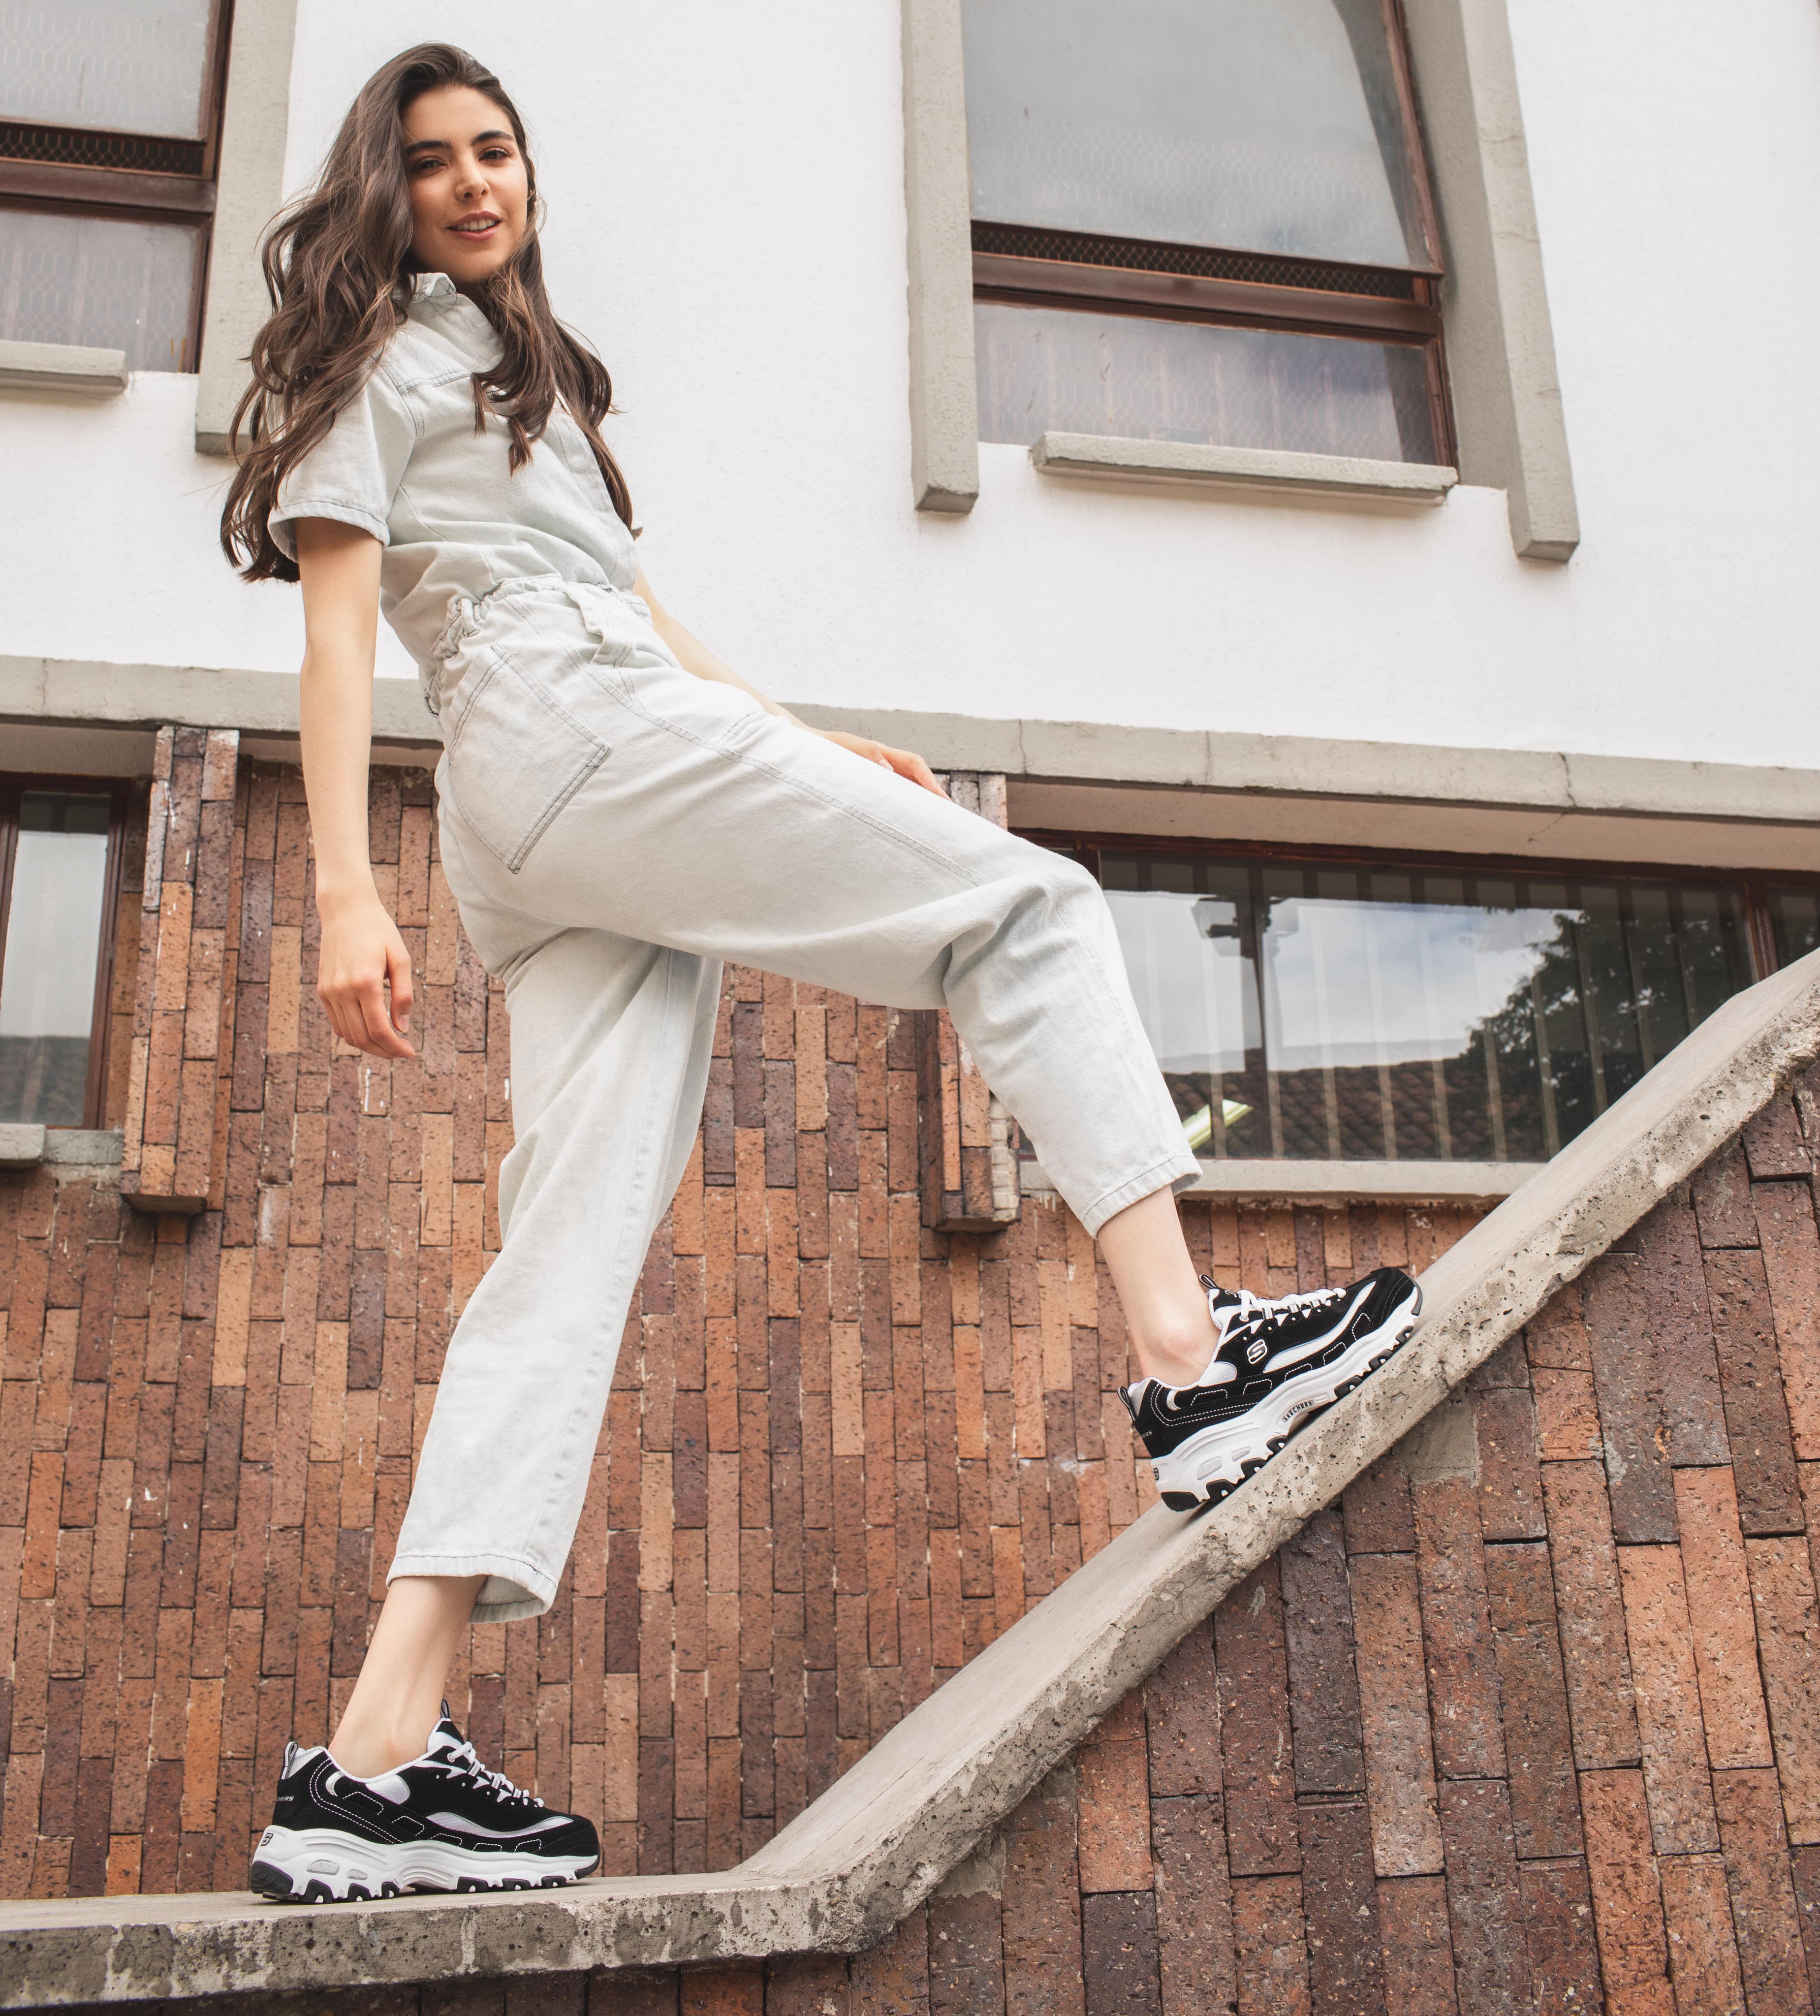 SKECHERS_UK on X: A classic look gets updated with comfort in the #SKECHERS  D'Lites - Biggest Fan shoe. 😎👟 @margaritaisaacs   / X